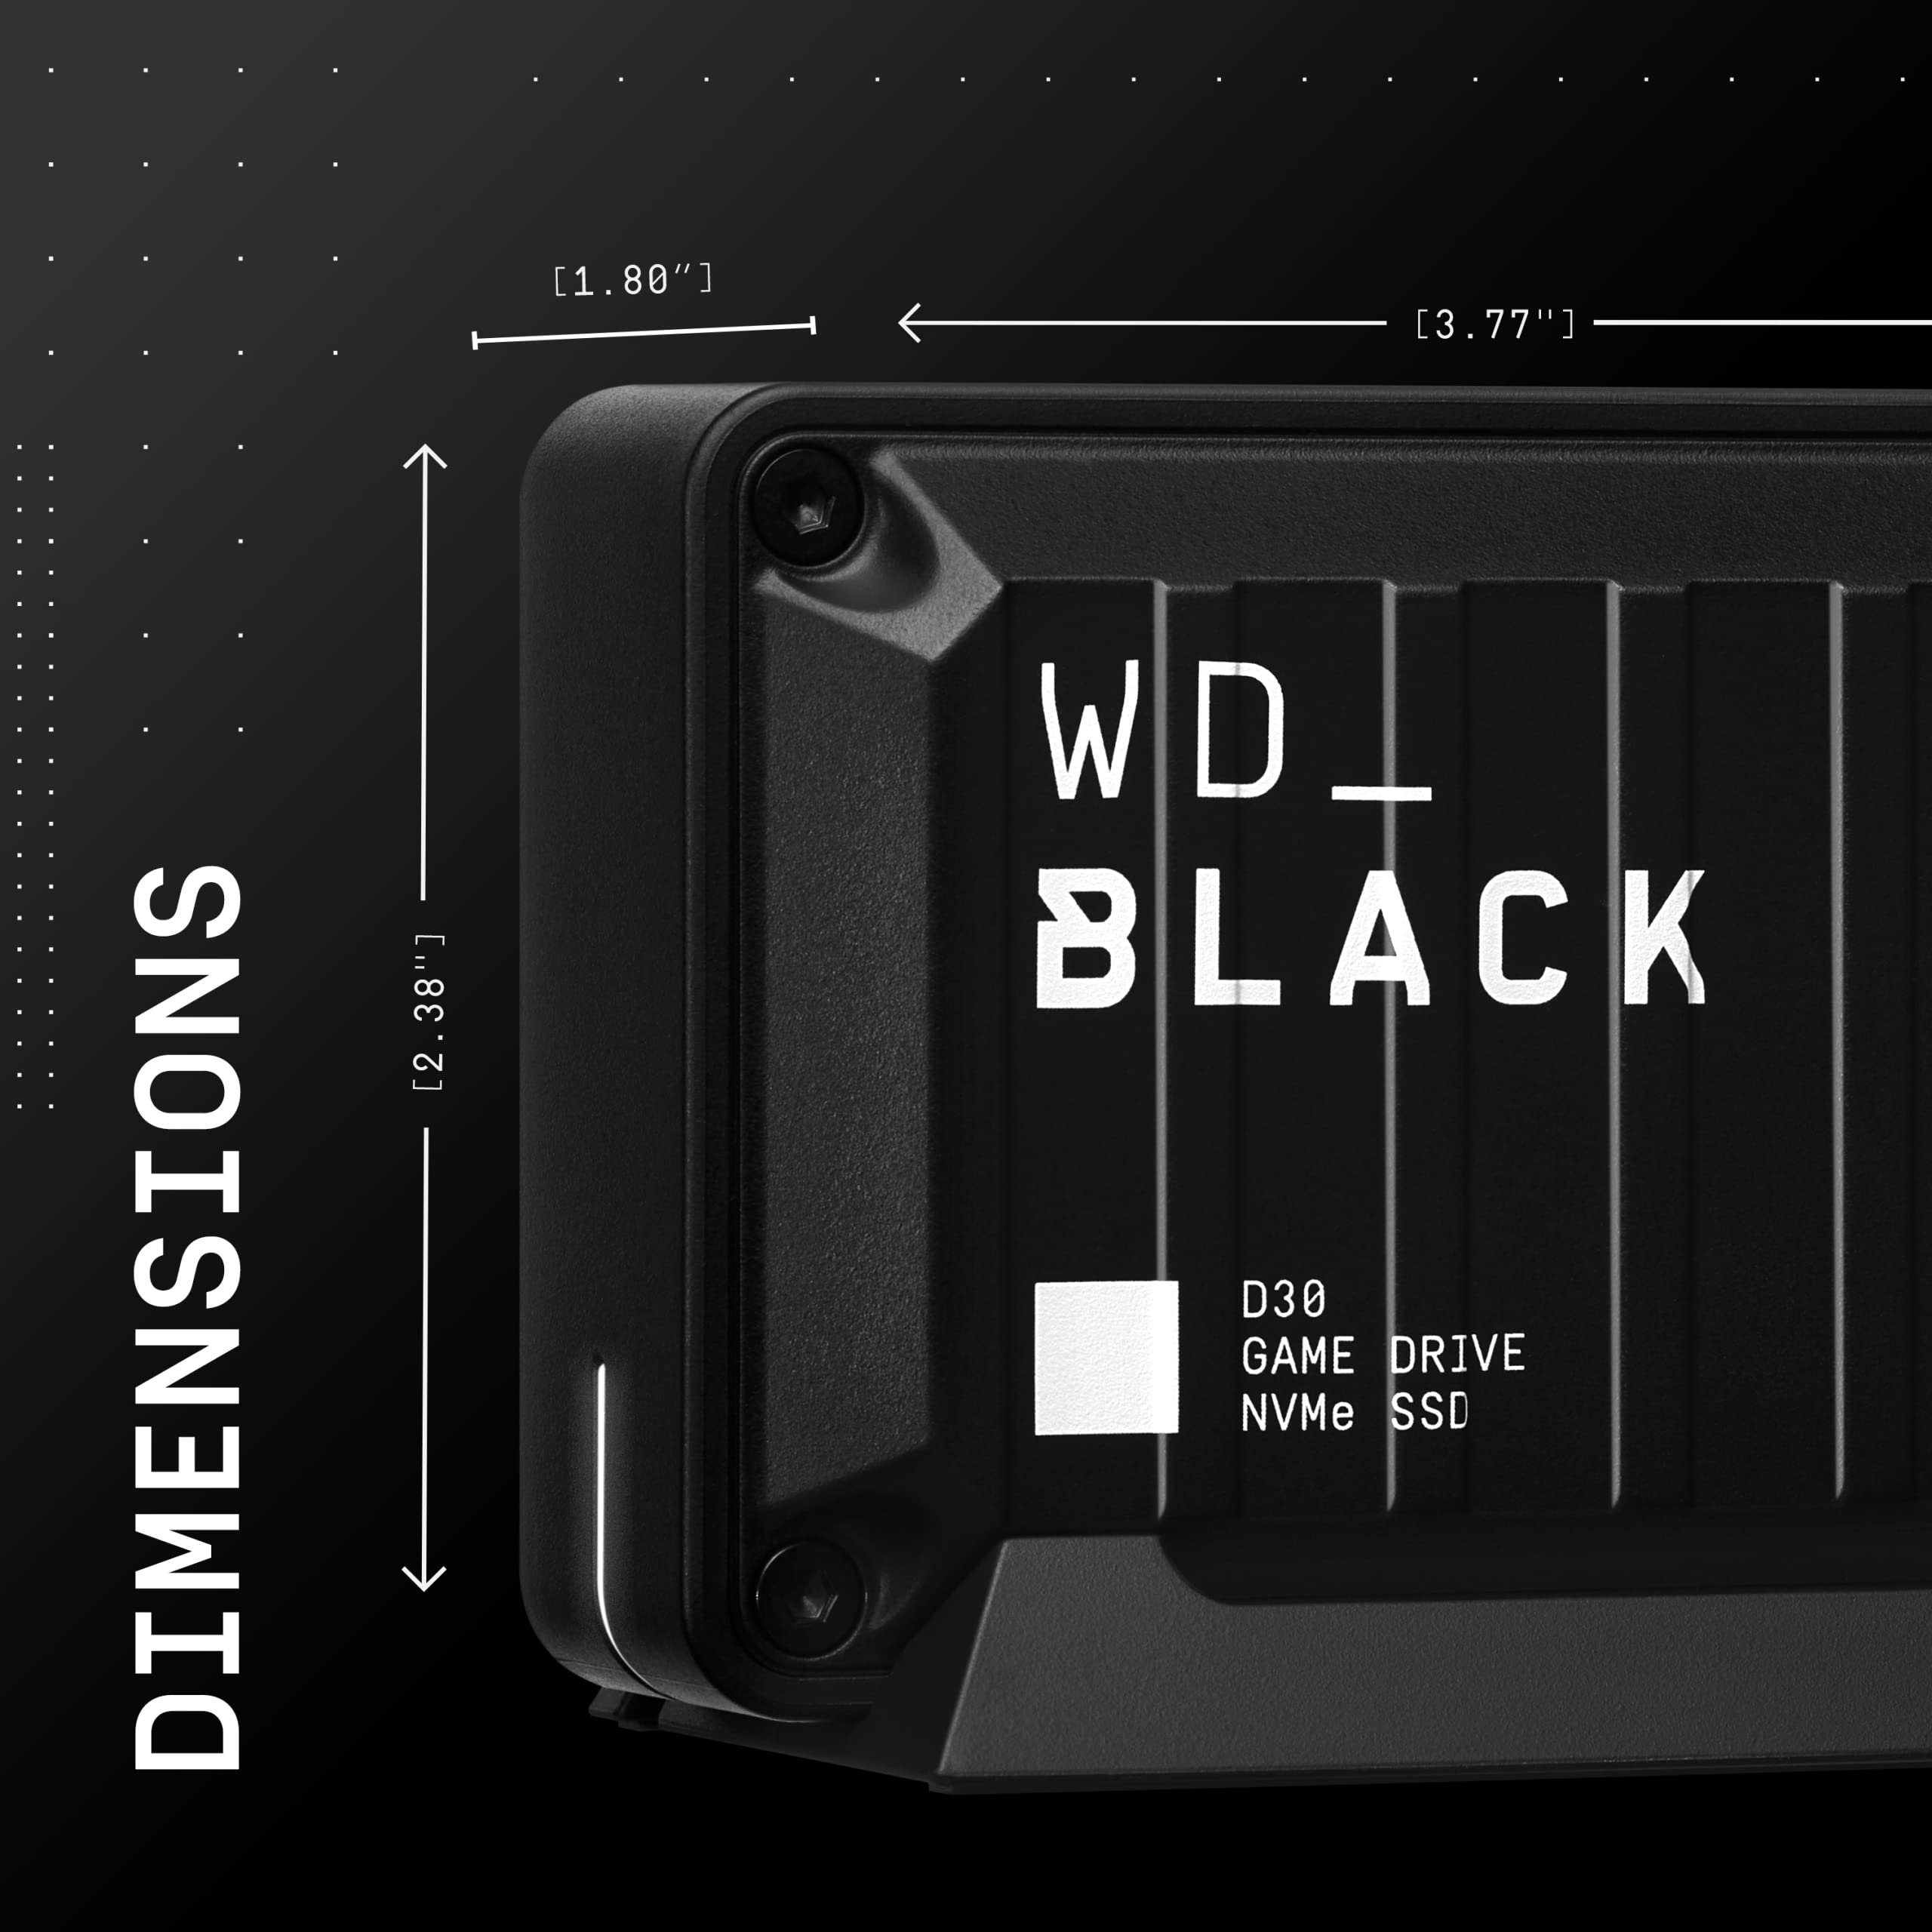 WD_BLACK 1TB D30 Game Drive SSD - Portable External Solid State Drive, Compatible with Playstation, Xbox, & PC, Up to 900MB/s - WDBATL0010BBK-WESN